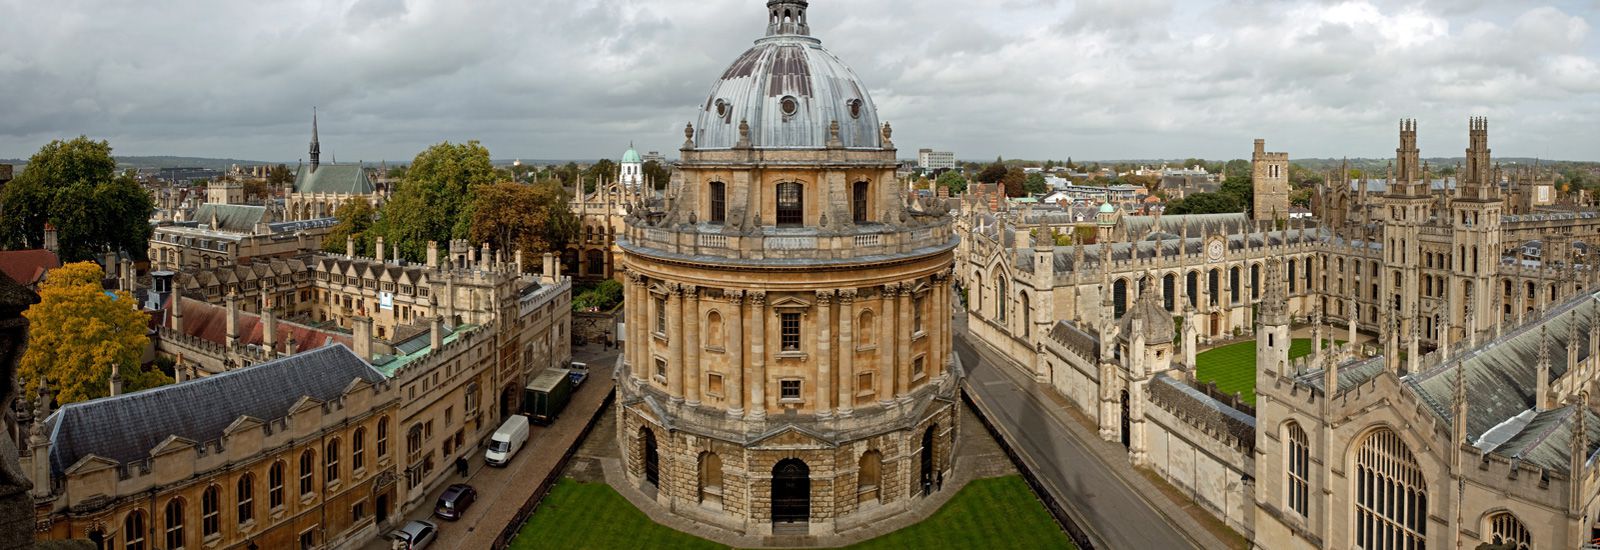 Oxford University is older than the Aztec civilization. The origination of the Aztec civilization, marked by the founding of the city of Tenochtitlán at Lake Texcoco, didn’t come until 1325, Oxford began classes in 1096.